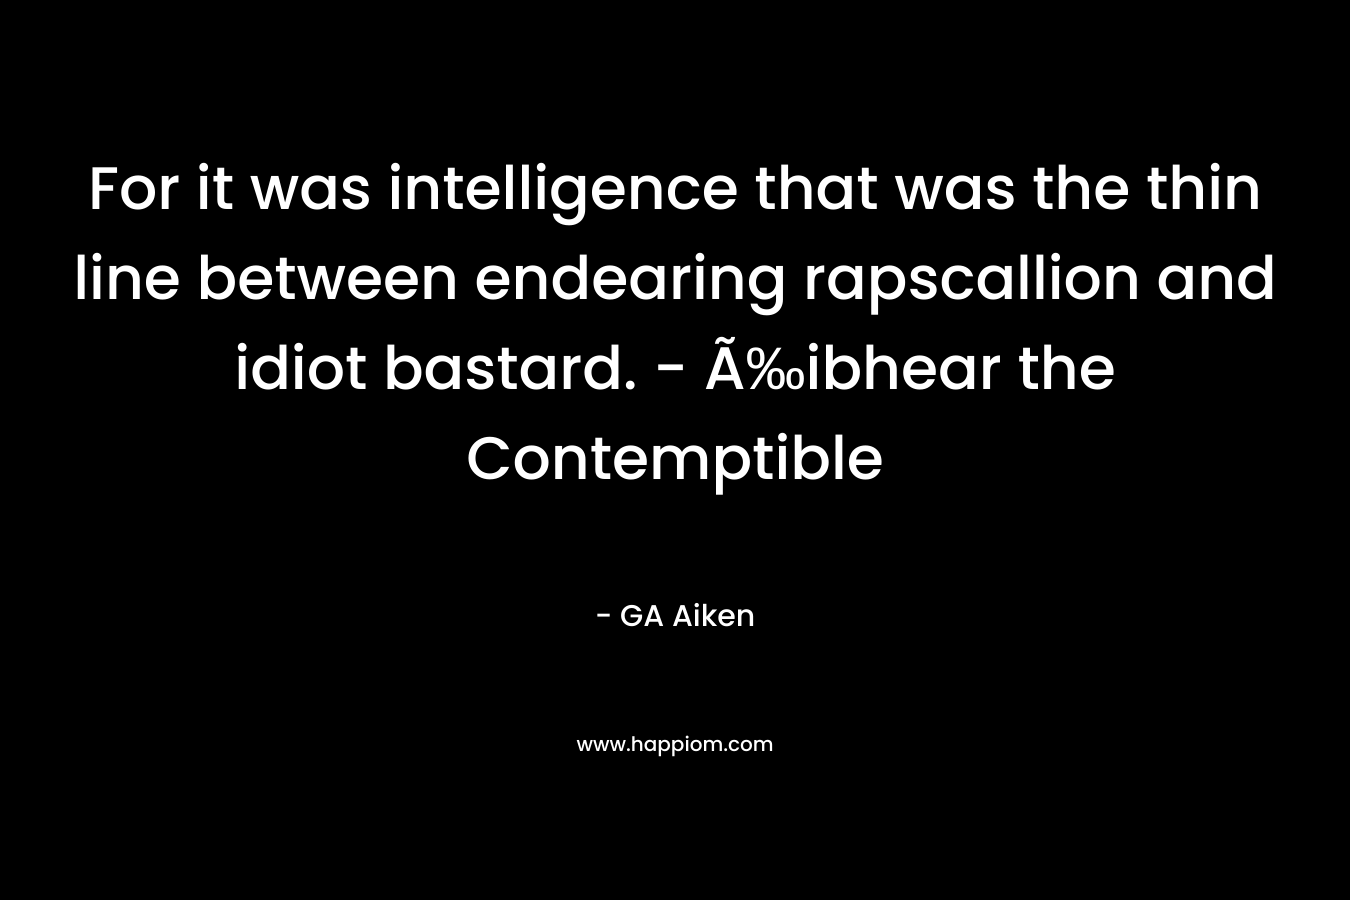 For it was intelligence that was the thin line between endearing rapscallion and idiot bastard. - Ã‰ibhear the Contemptible